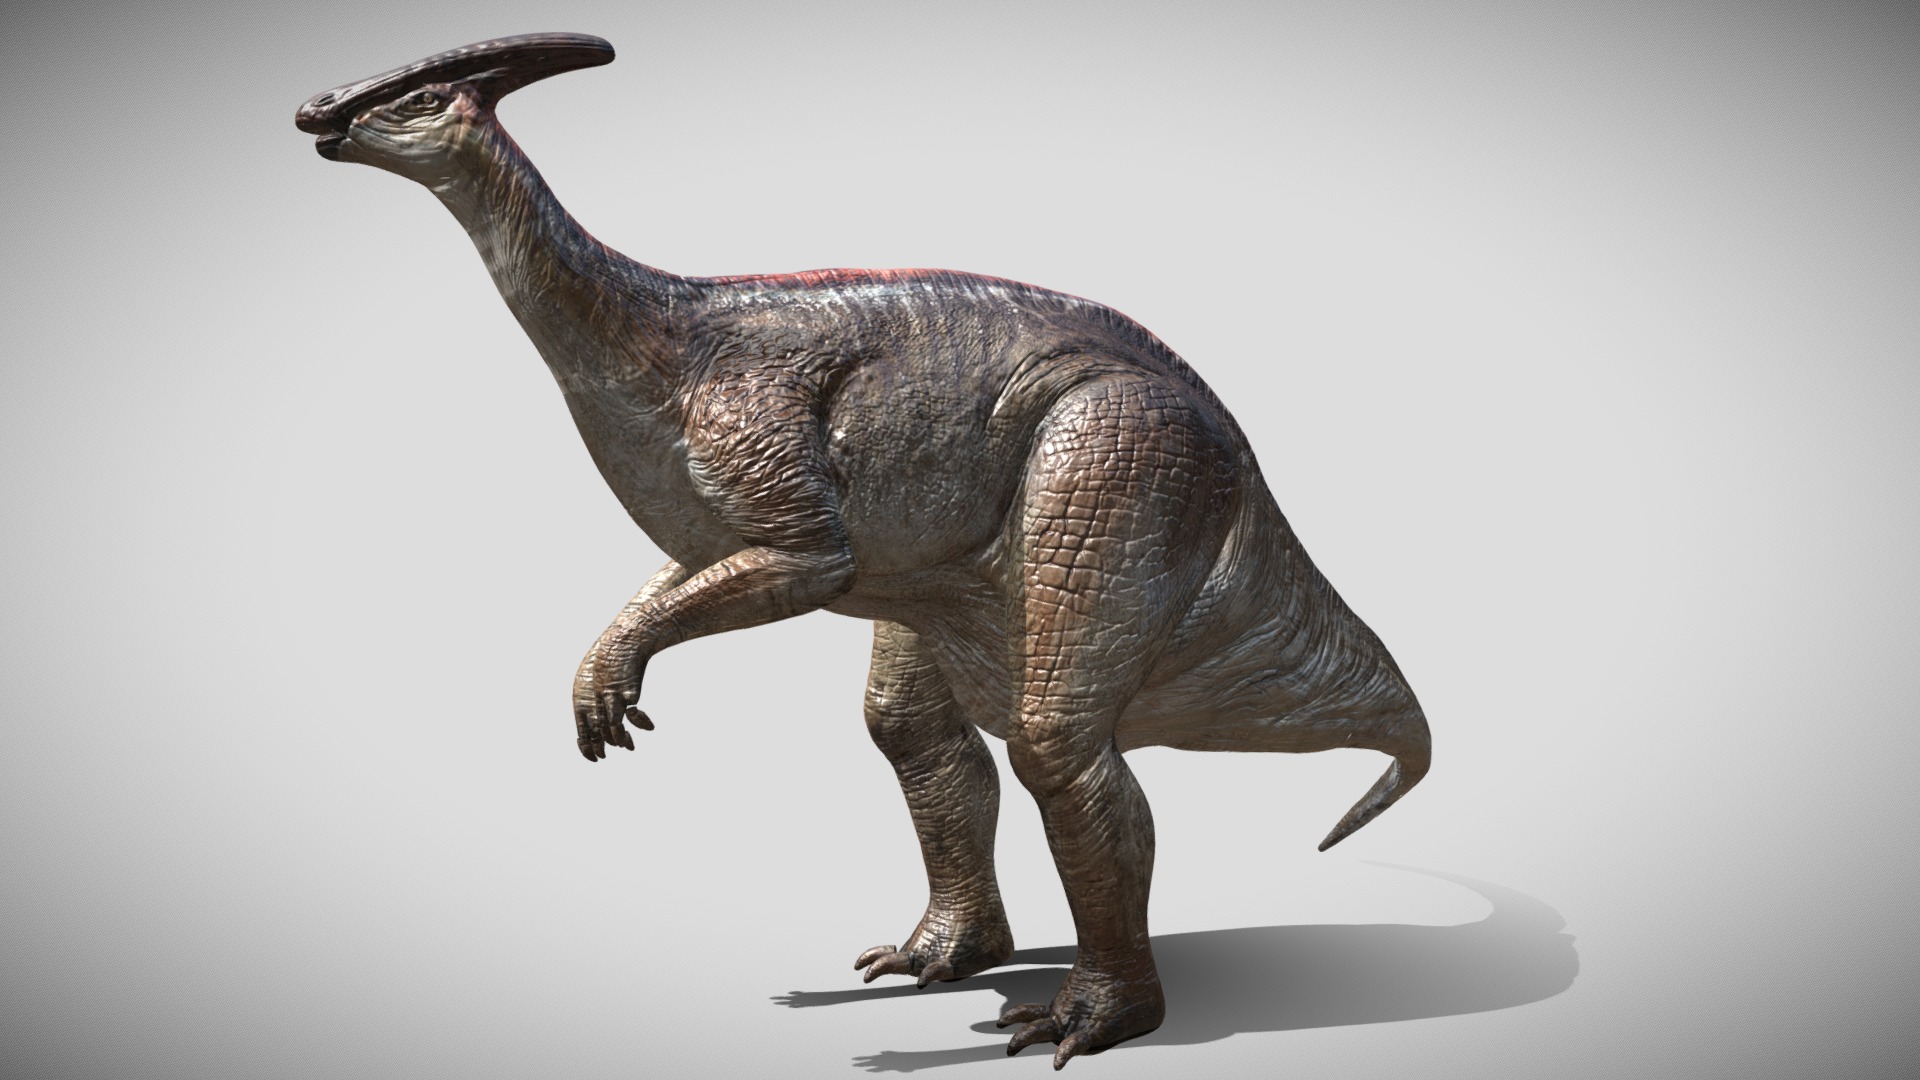 3D model Parasaurolophus 3D Rigged model - This is a 3D model of the Parasaurolophus 3D Rigged model. The 3D model is about a dinosaur with a long neck.